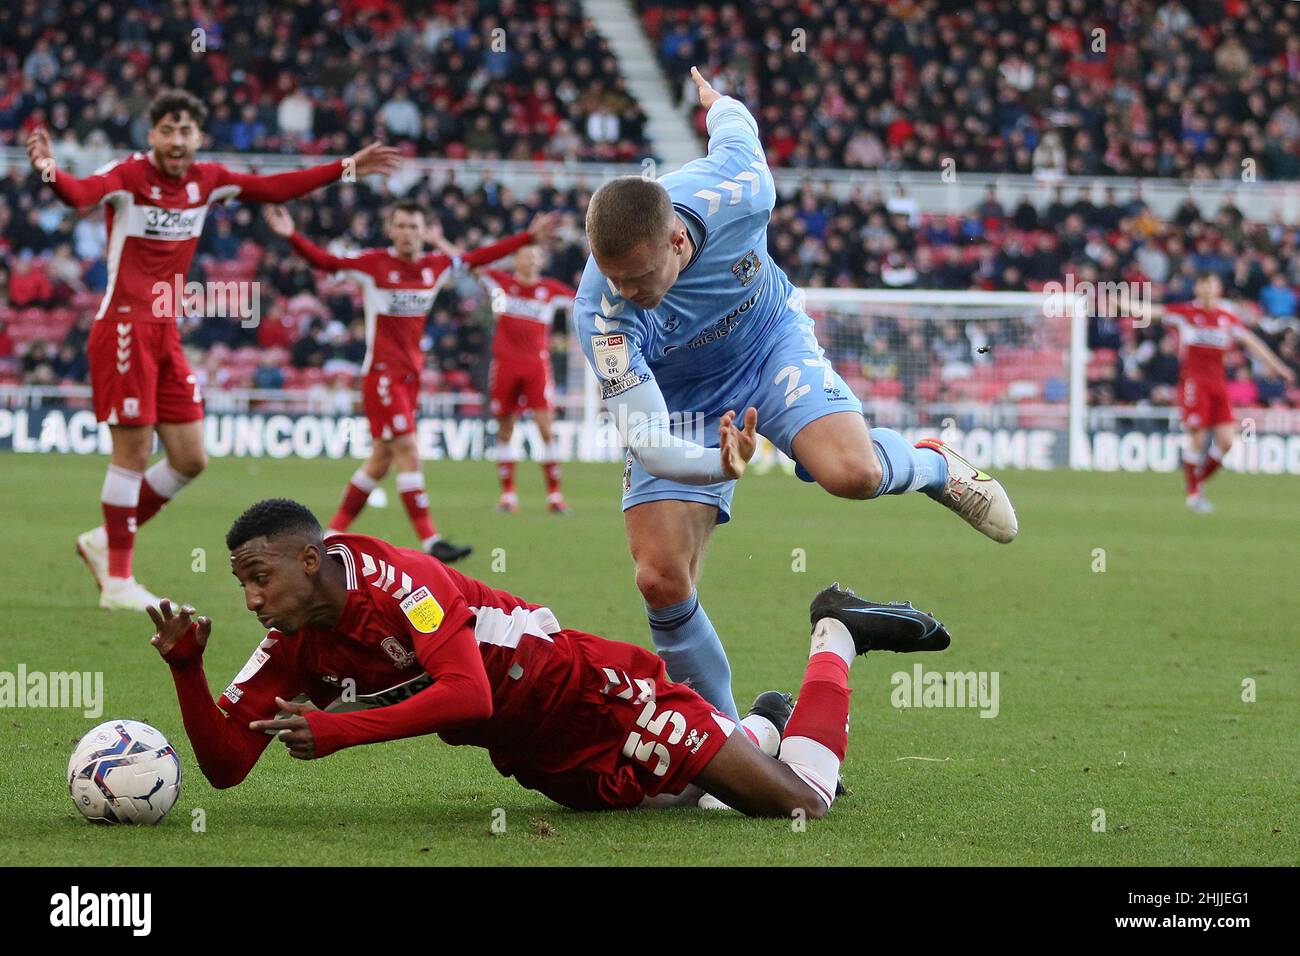 Jake Bidwell of Coventry City brings down Isaiah Jones of Middlesbrough - Middlesbrough v Coventry City, Sky Bet Championship, Riverside Stadium, Middlesbrough, UK - 29th January 2022  Editorial Use Only - DataCo restrictions apply Stock Photo